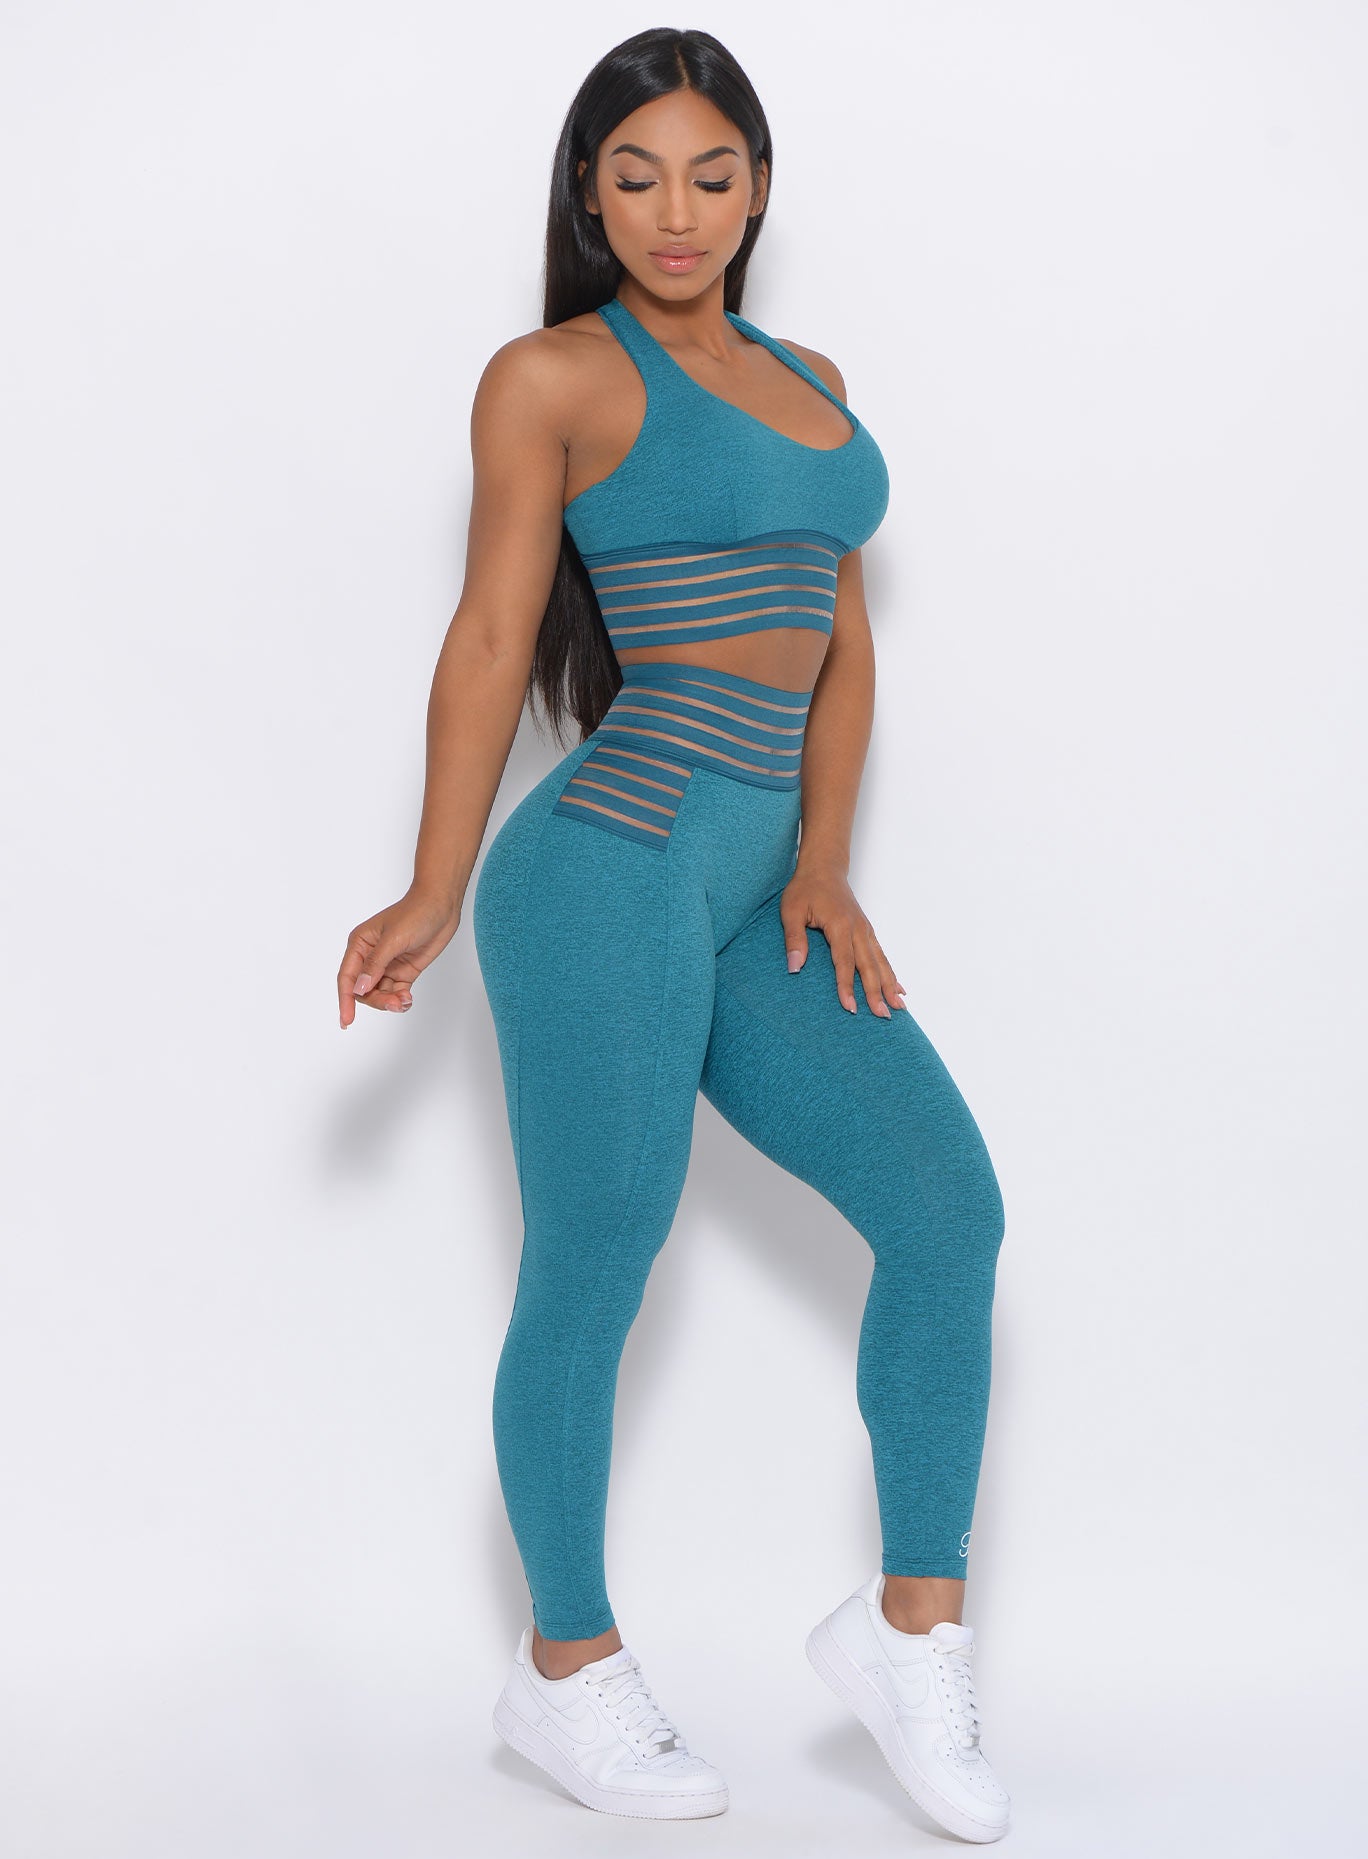 Right side view of the model angled right in our statement leggings in seafoam color and a matching bra